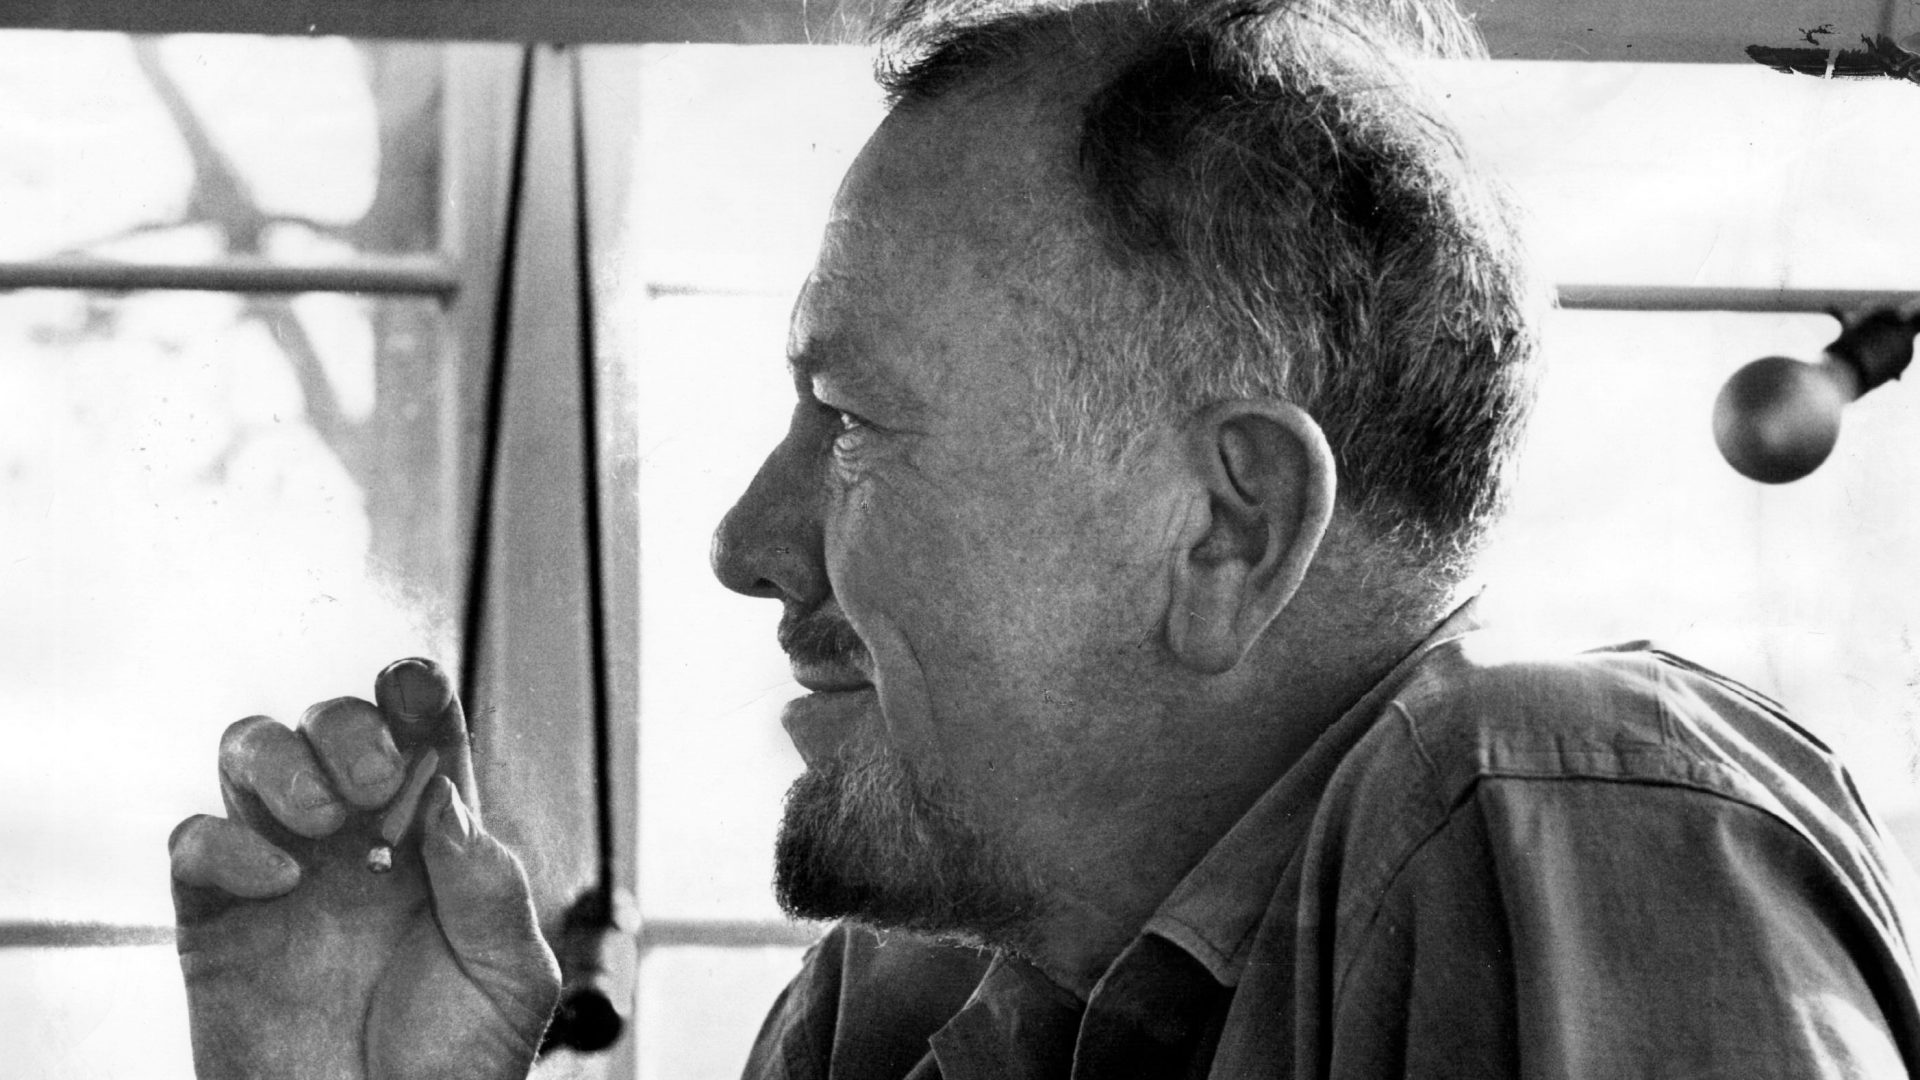 John Steinbeck admires the view from the porch of his Sag Harbor, New York home shortly after winning the Nobel Prize for Literature, 1962. Photo: Max Heine/Newsday RM/Getty